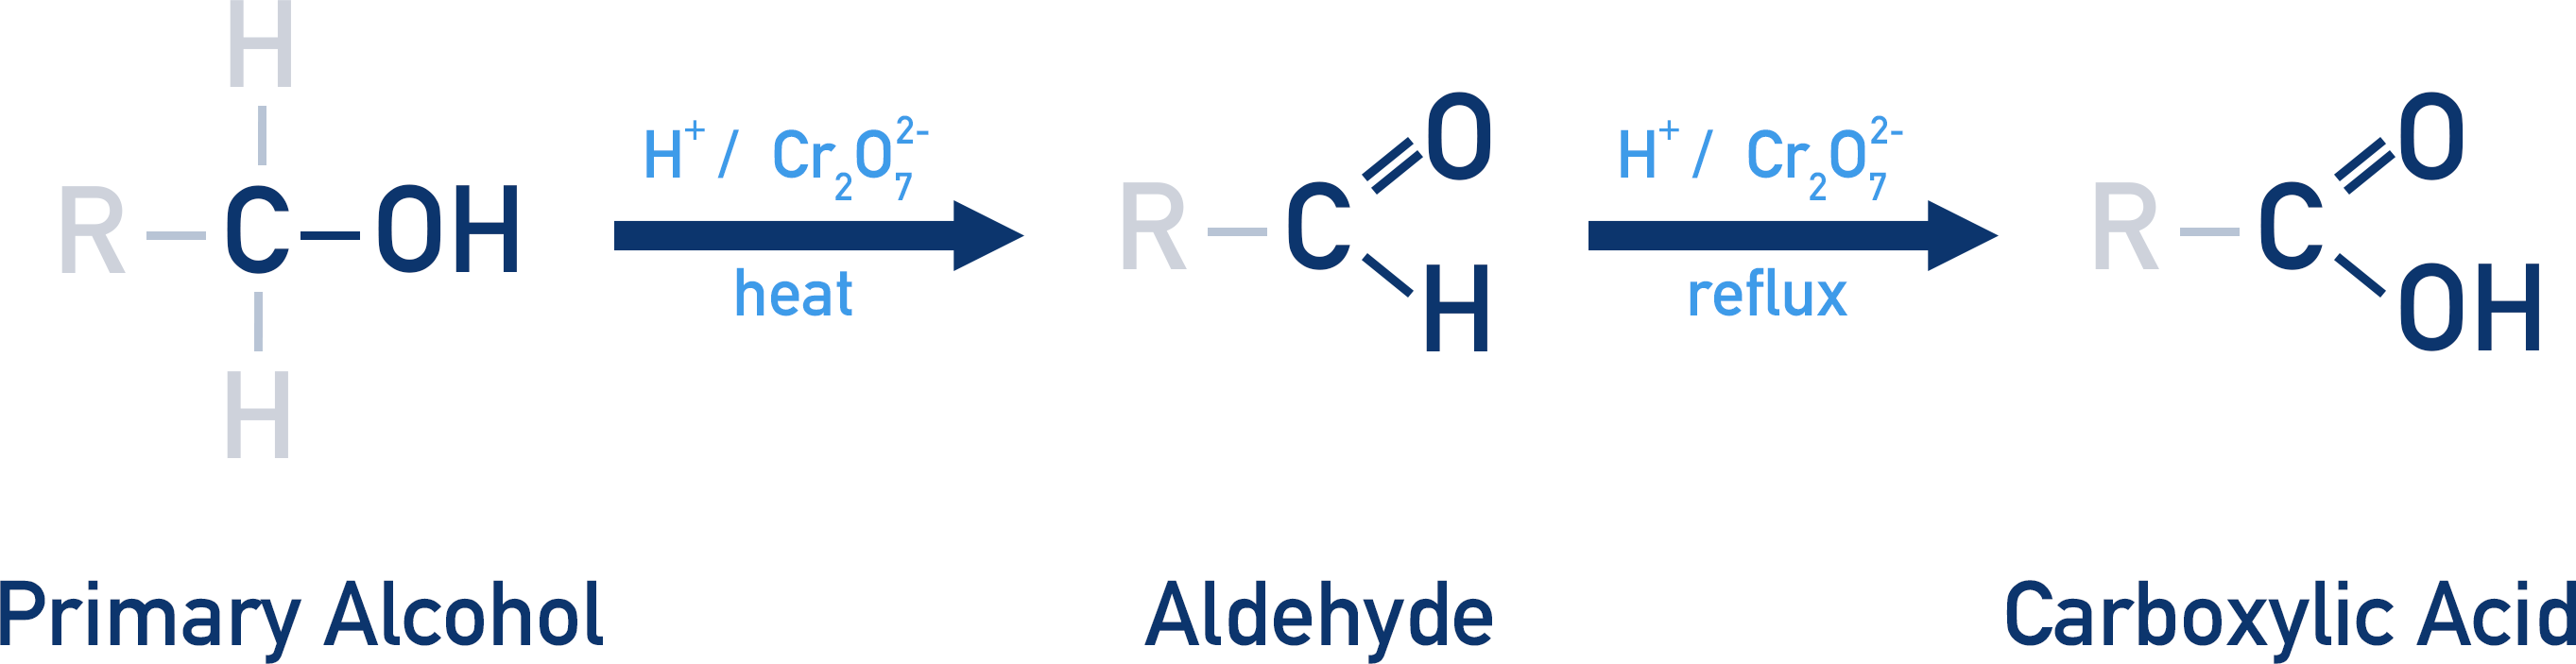 oxidation of primary alcohol to aldehyde to carboxylic acid